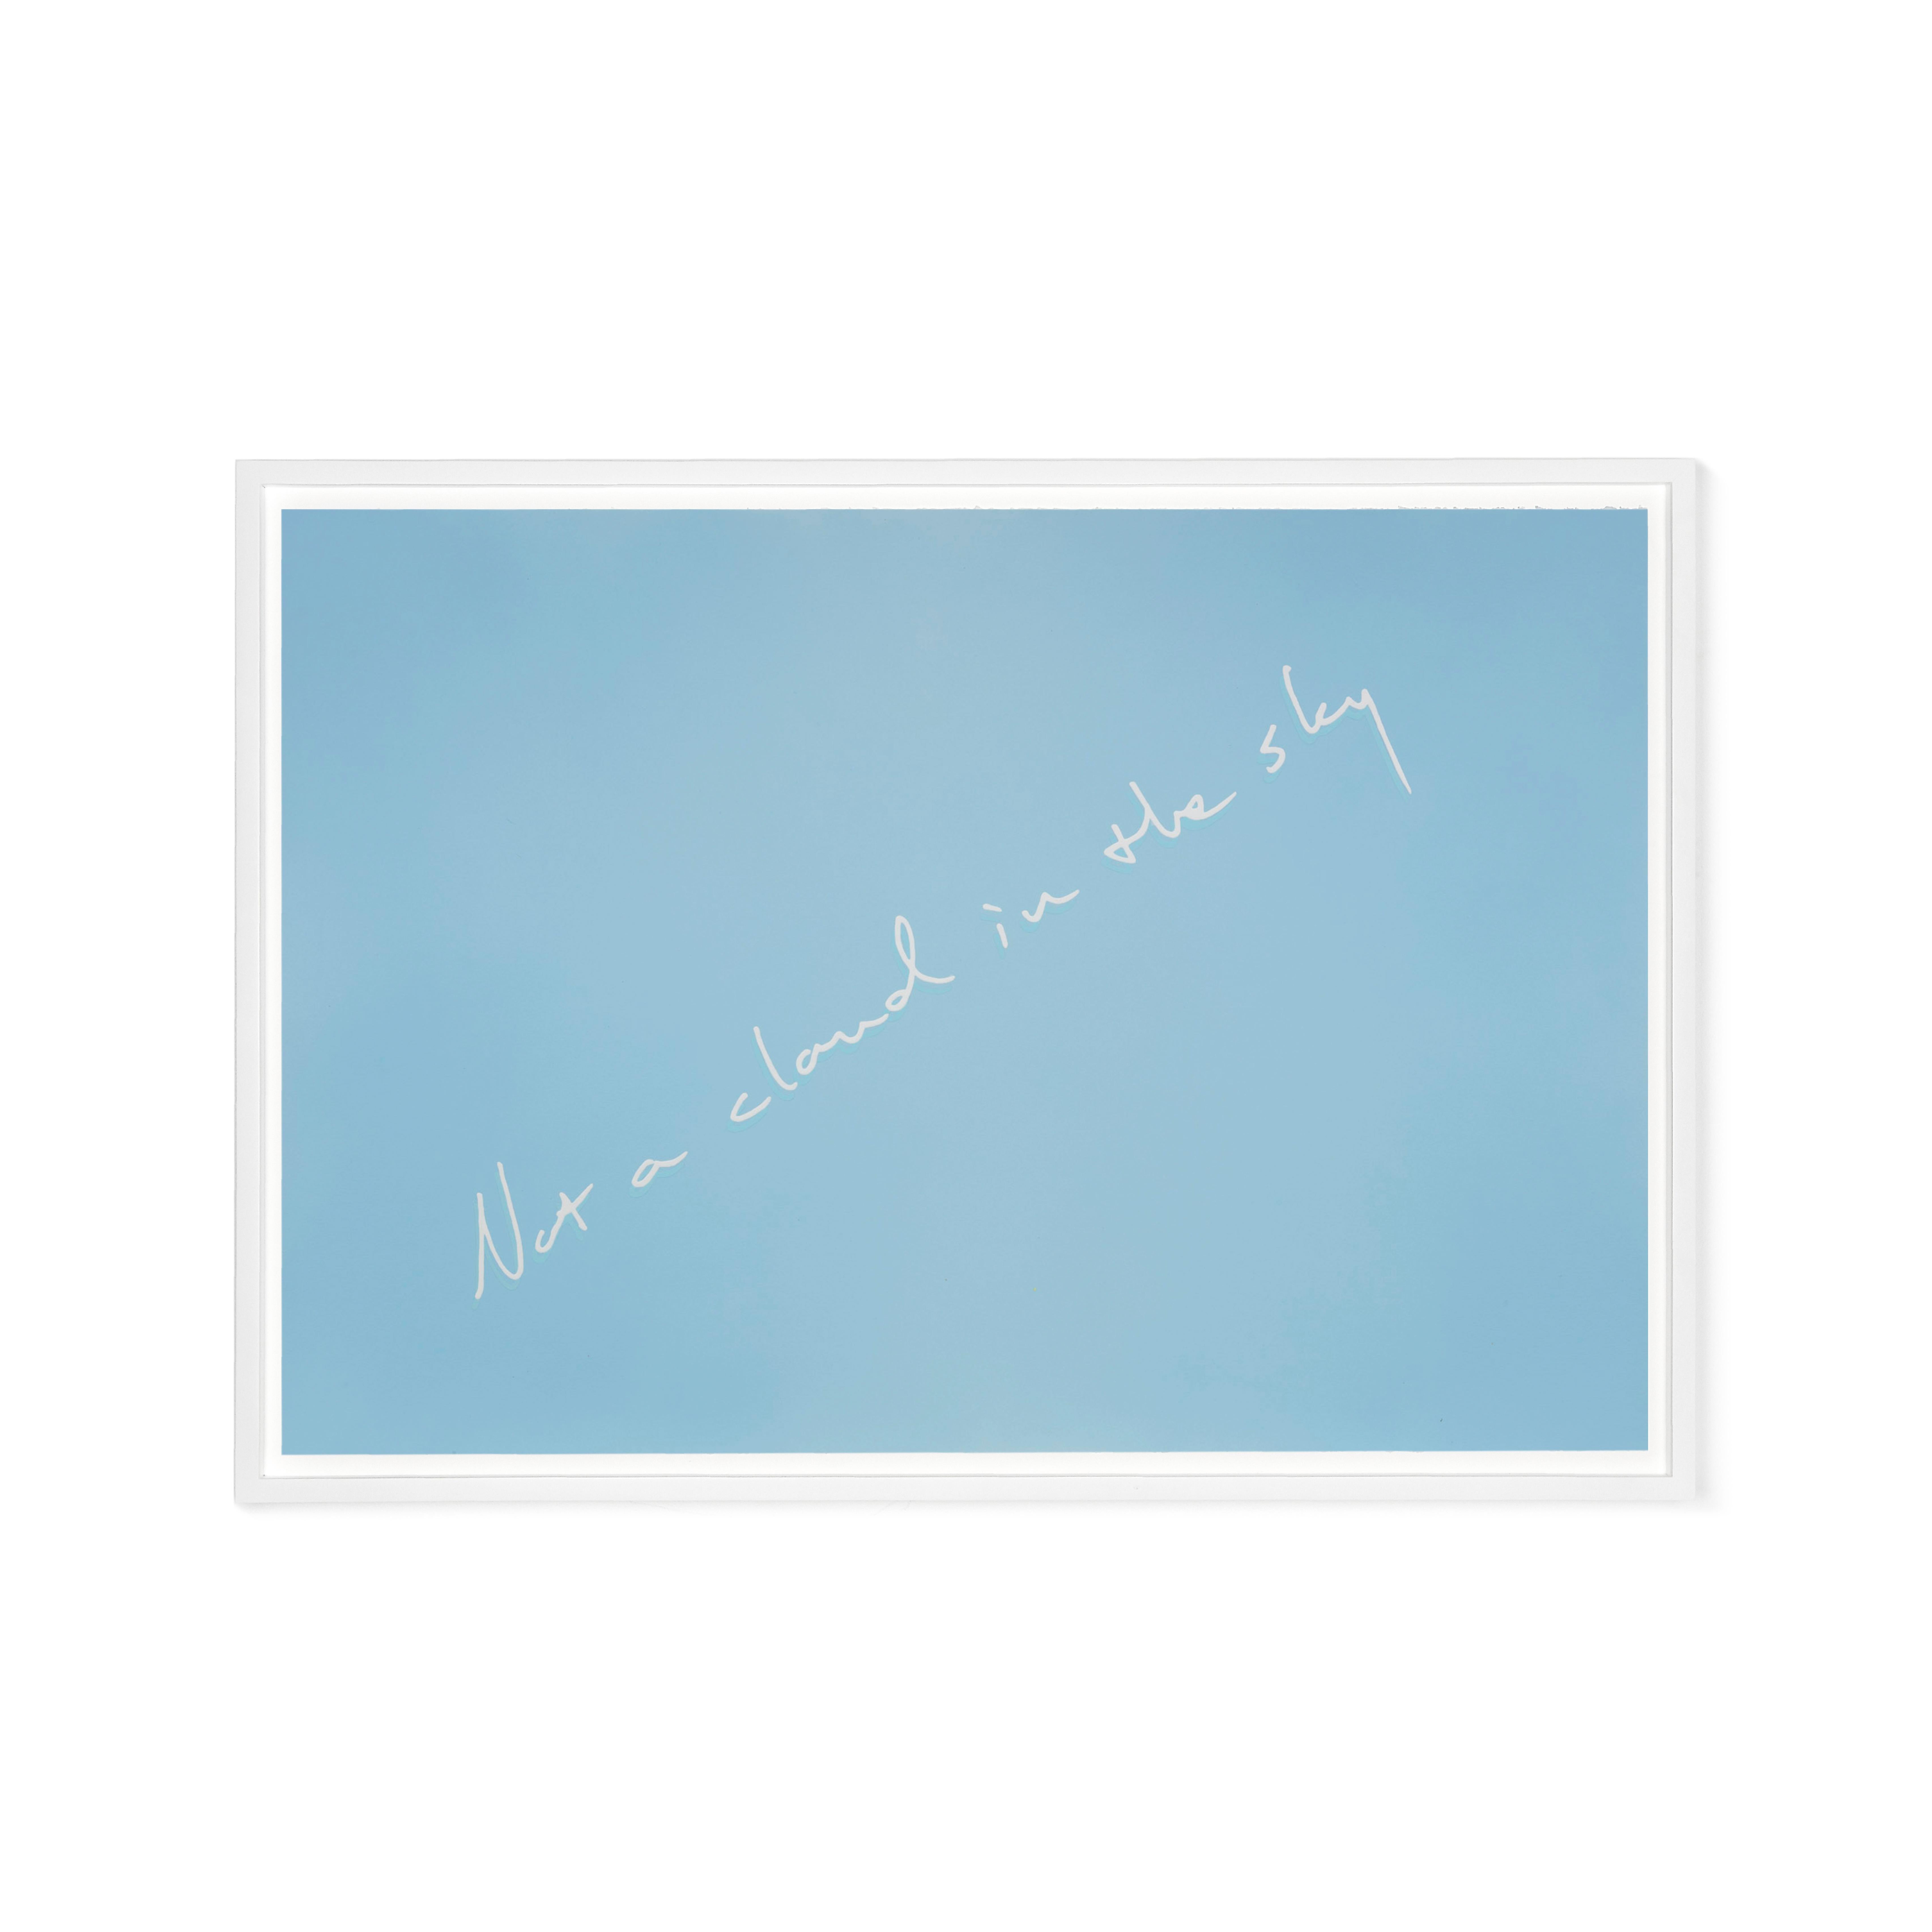 Untitled (Not a cloud in the sky), 2018 is a unique contemporary textual painting on paper. The artist first creates a unique background atmosphere with matte spray paint and then meticulously hand-paints text in his material of choice, nail